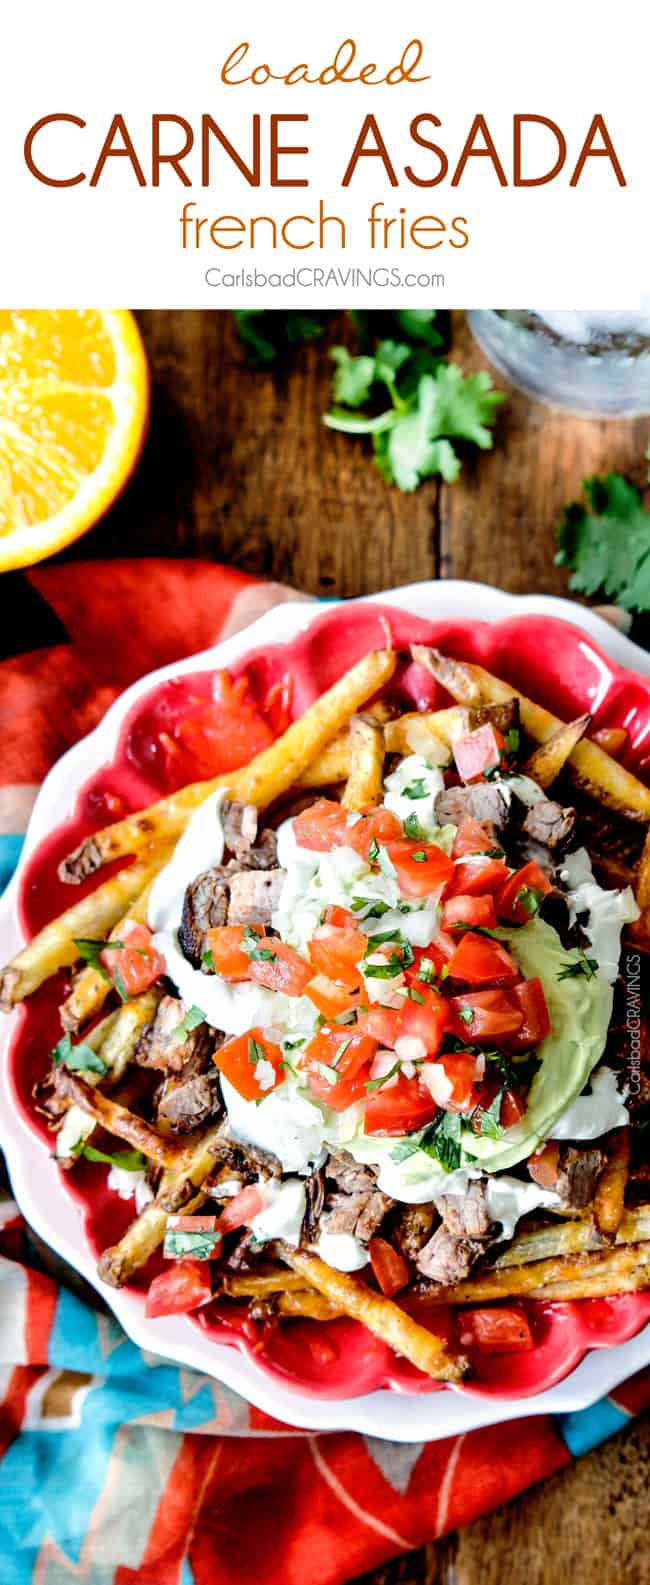 Forget the nachos, these Loaded Carne Asada Fries are so addictingly delicious! baked Mexican spiced French fries smothered in cheese and piled high with tender juicy steak, salsa, avocado crema, etc.